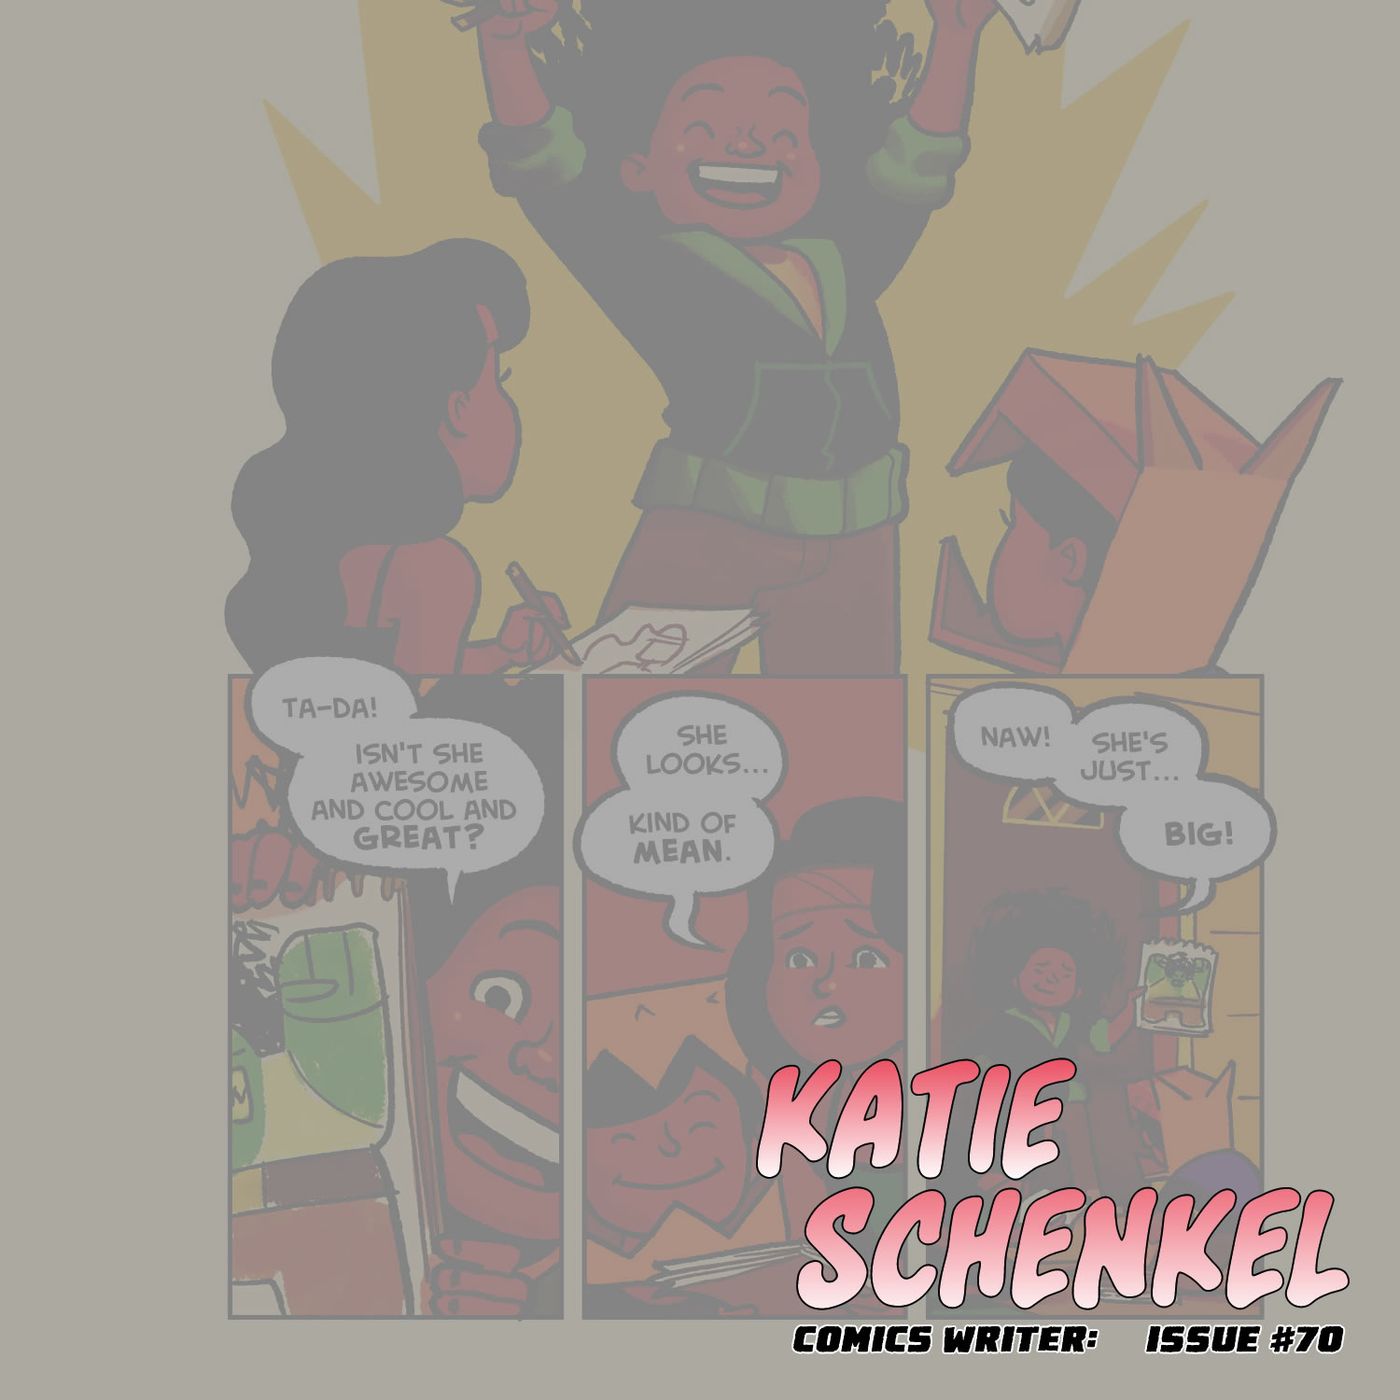 Katie Schenkel on the craft of writing, the process, and writing comics for kids